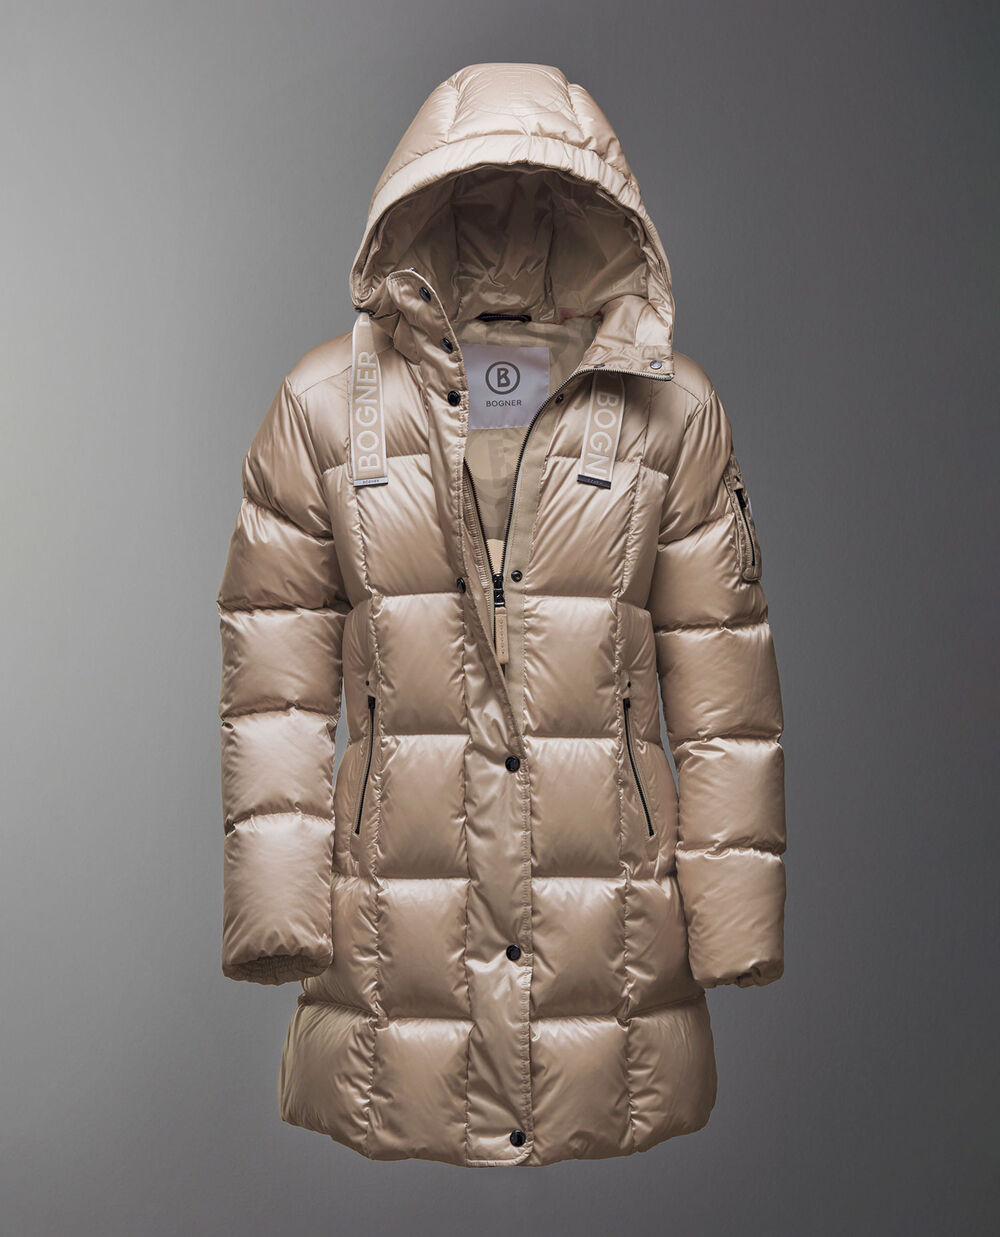 BOGNER Jacket - luxuriously sporty and unique | buy online